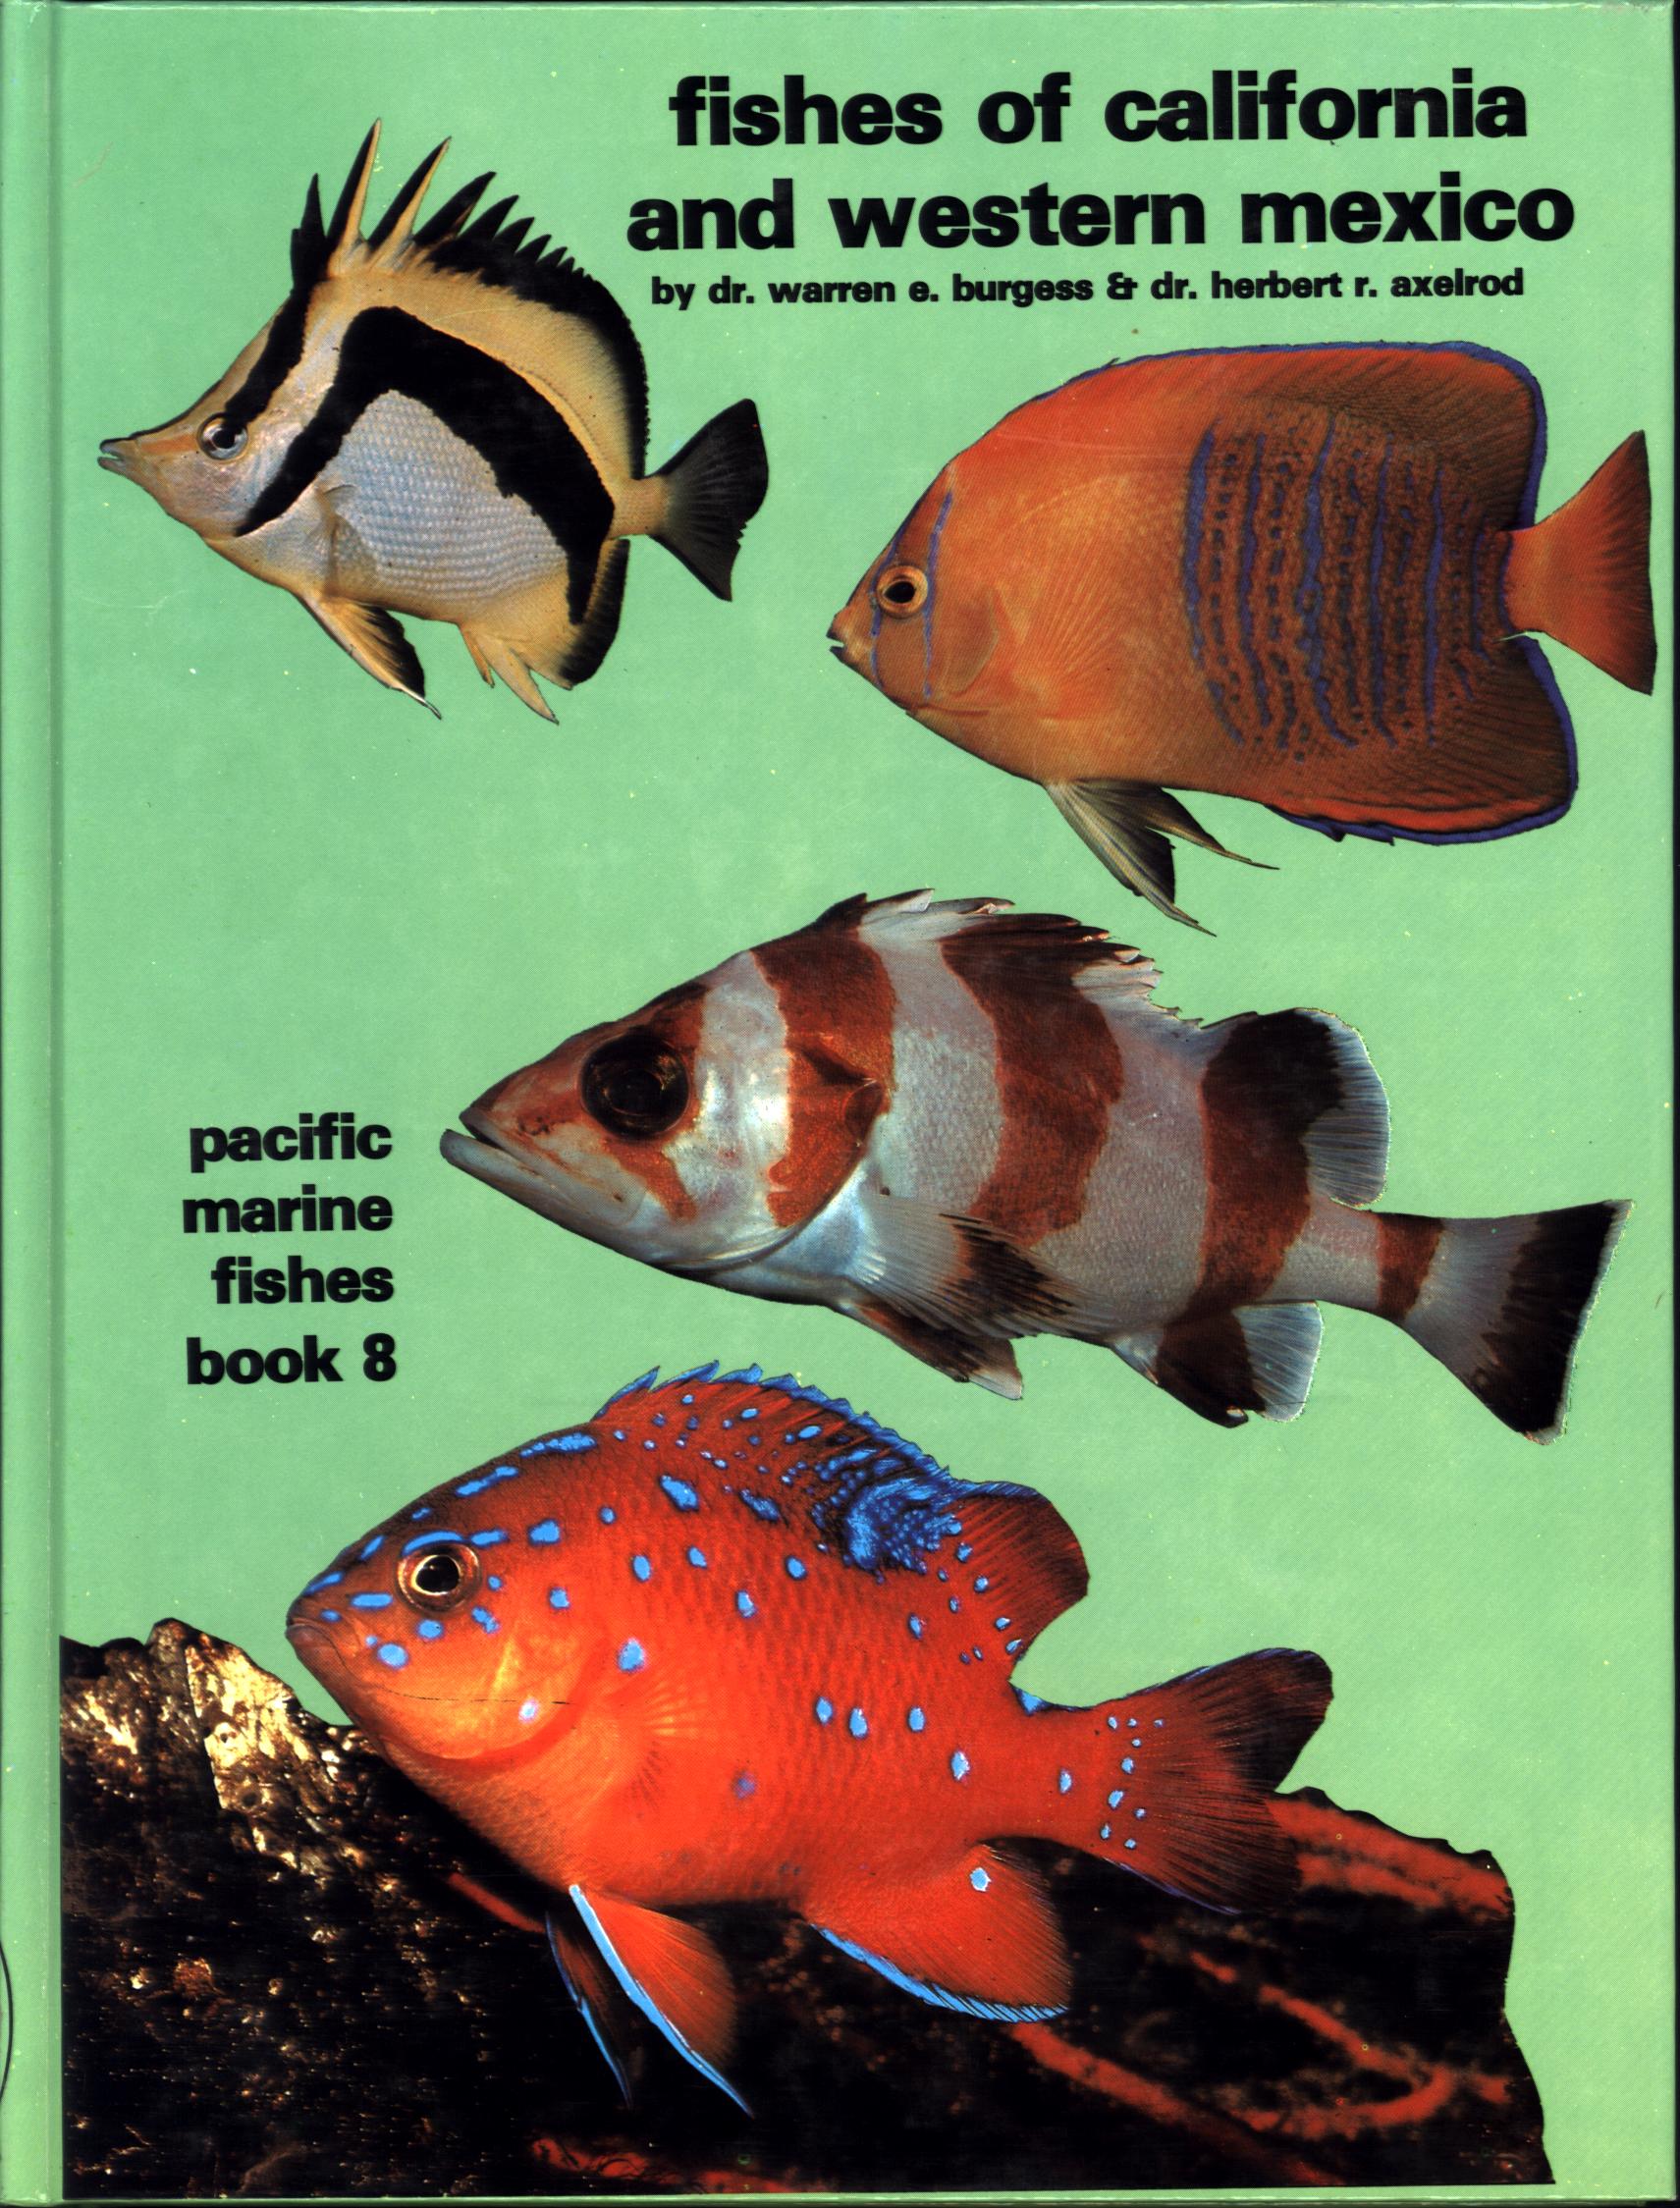 FISHES OF CALIFORNIA AND WESTERN MEXICO: Pacific marine fishes, Book 8 (California & Western Mexico). tfhp6102a